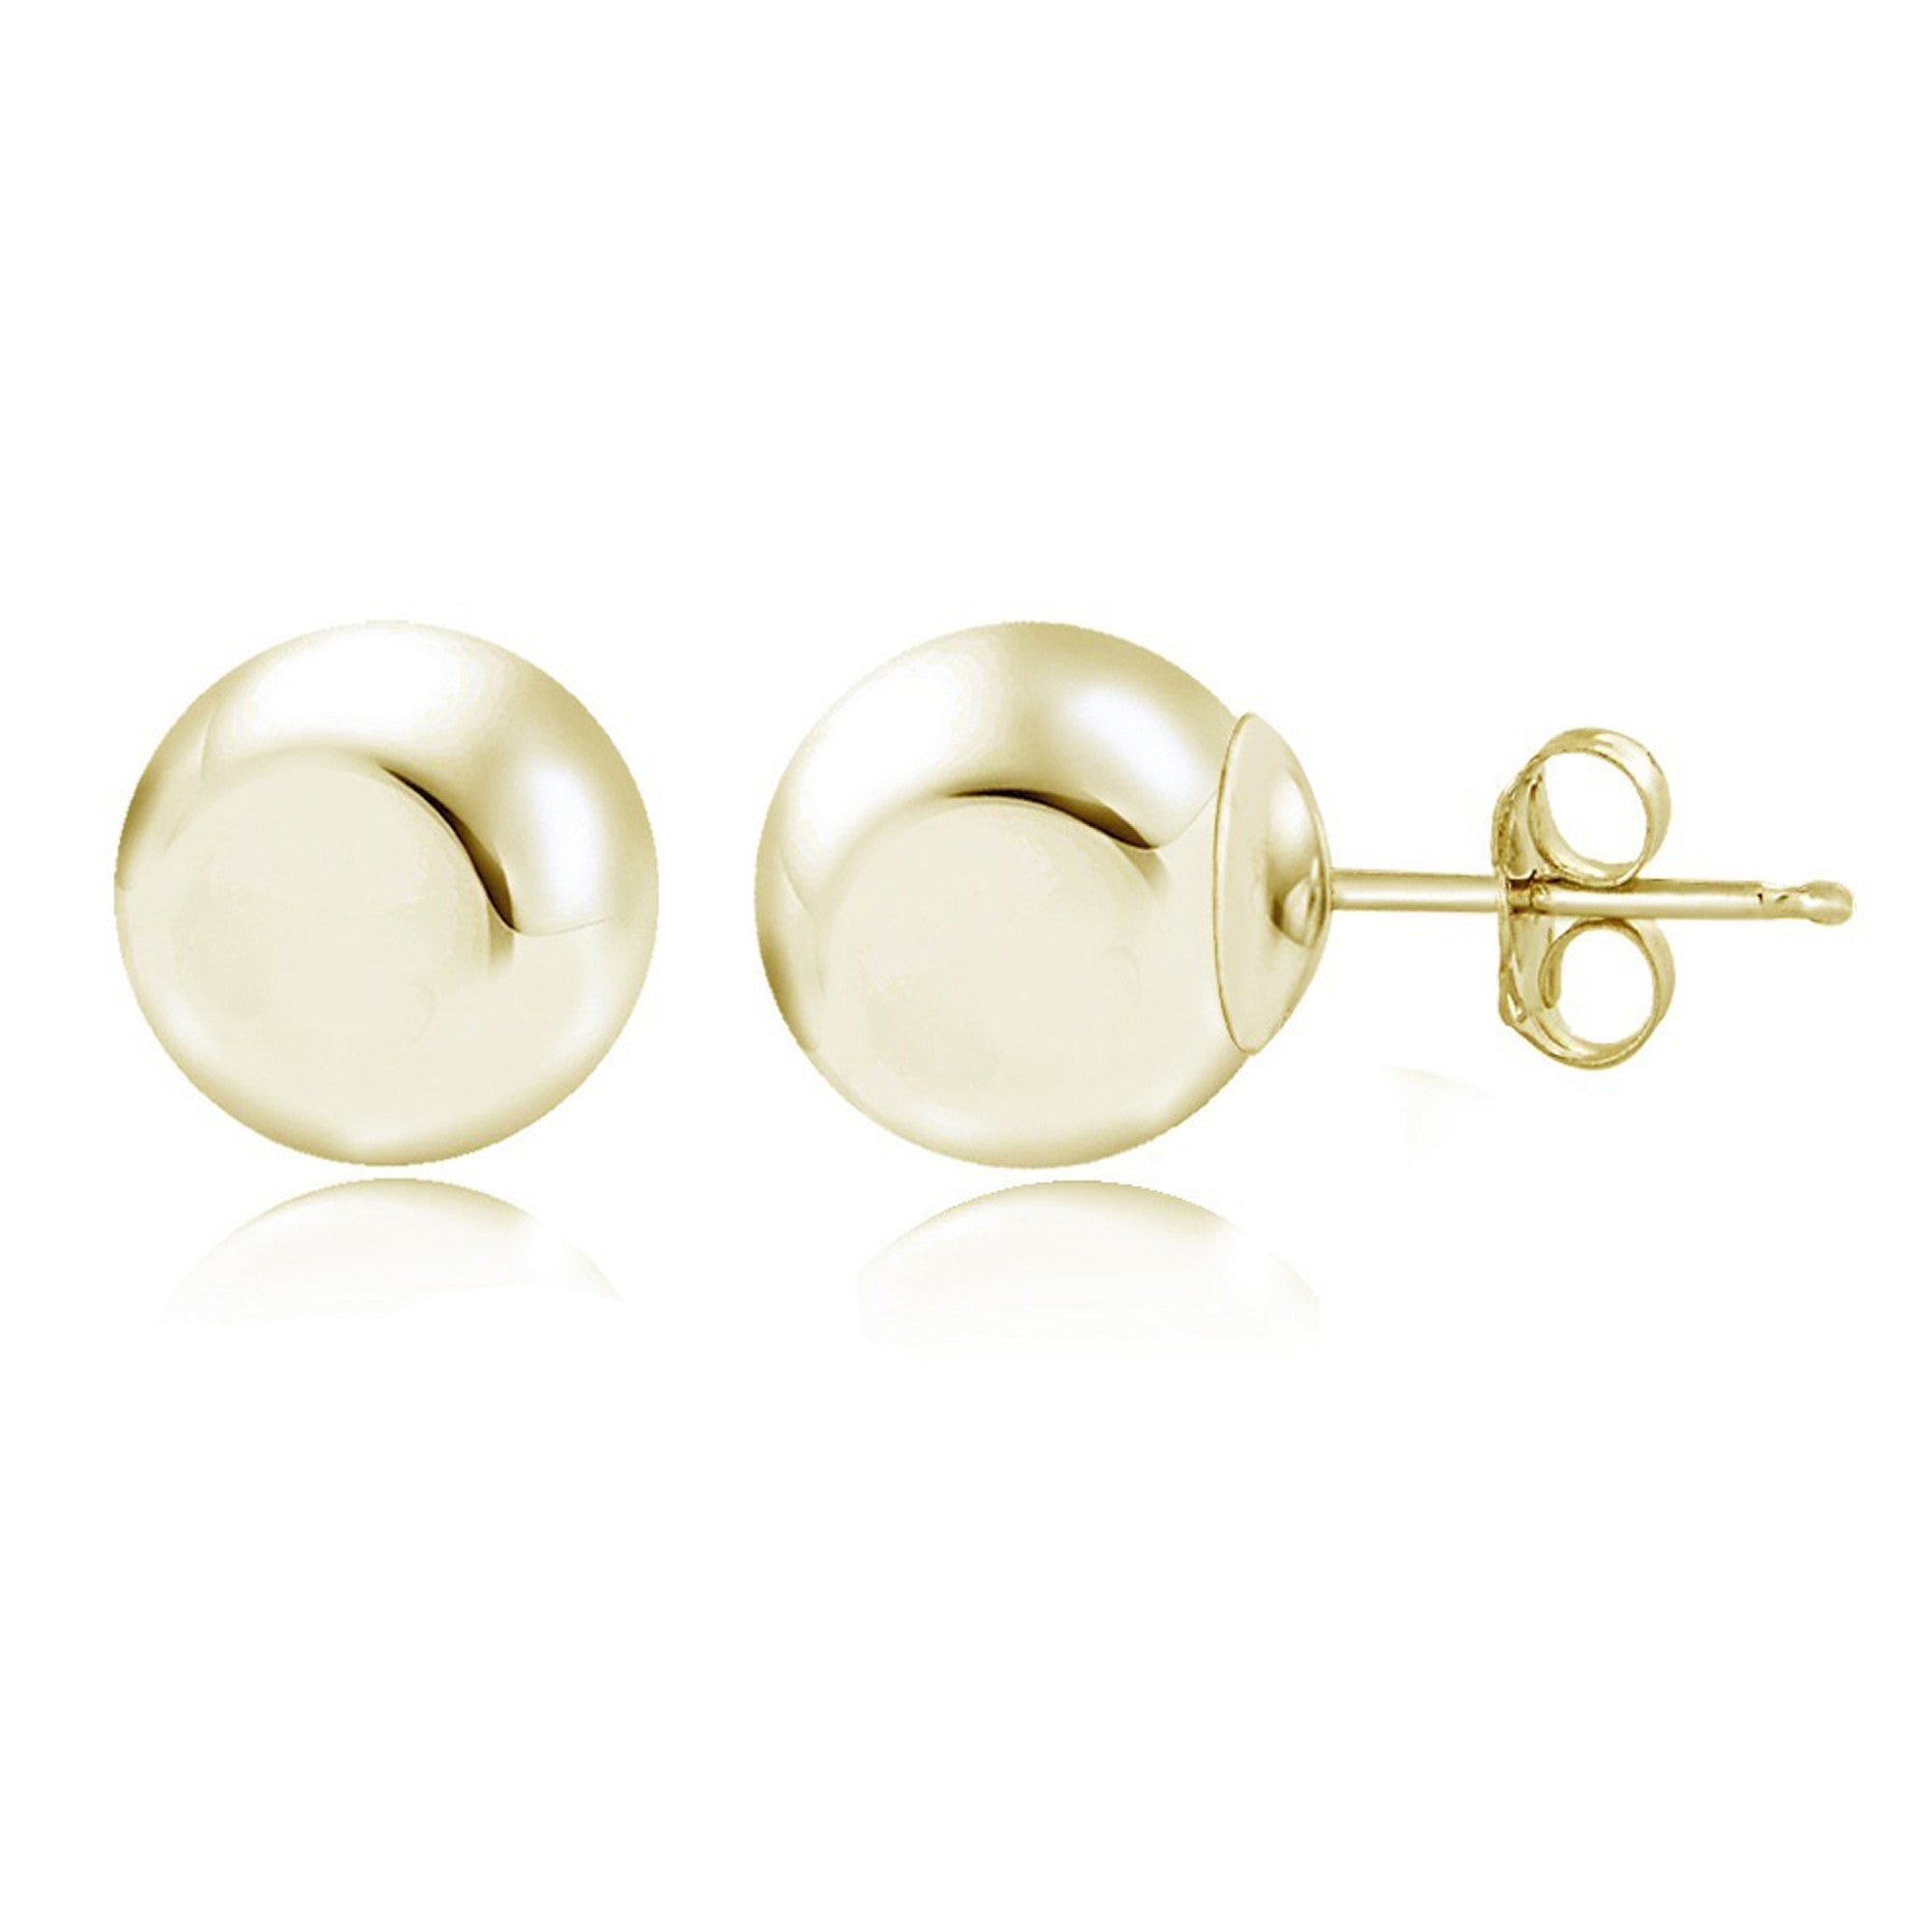 Round Ball Butterfly Clasp Stud Earrings - 6mm Yellow Gold